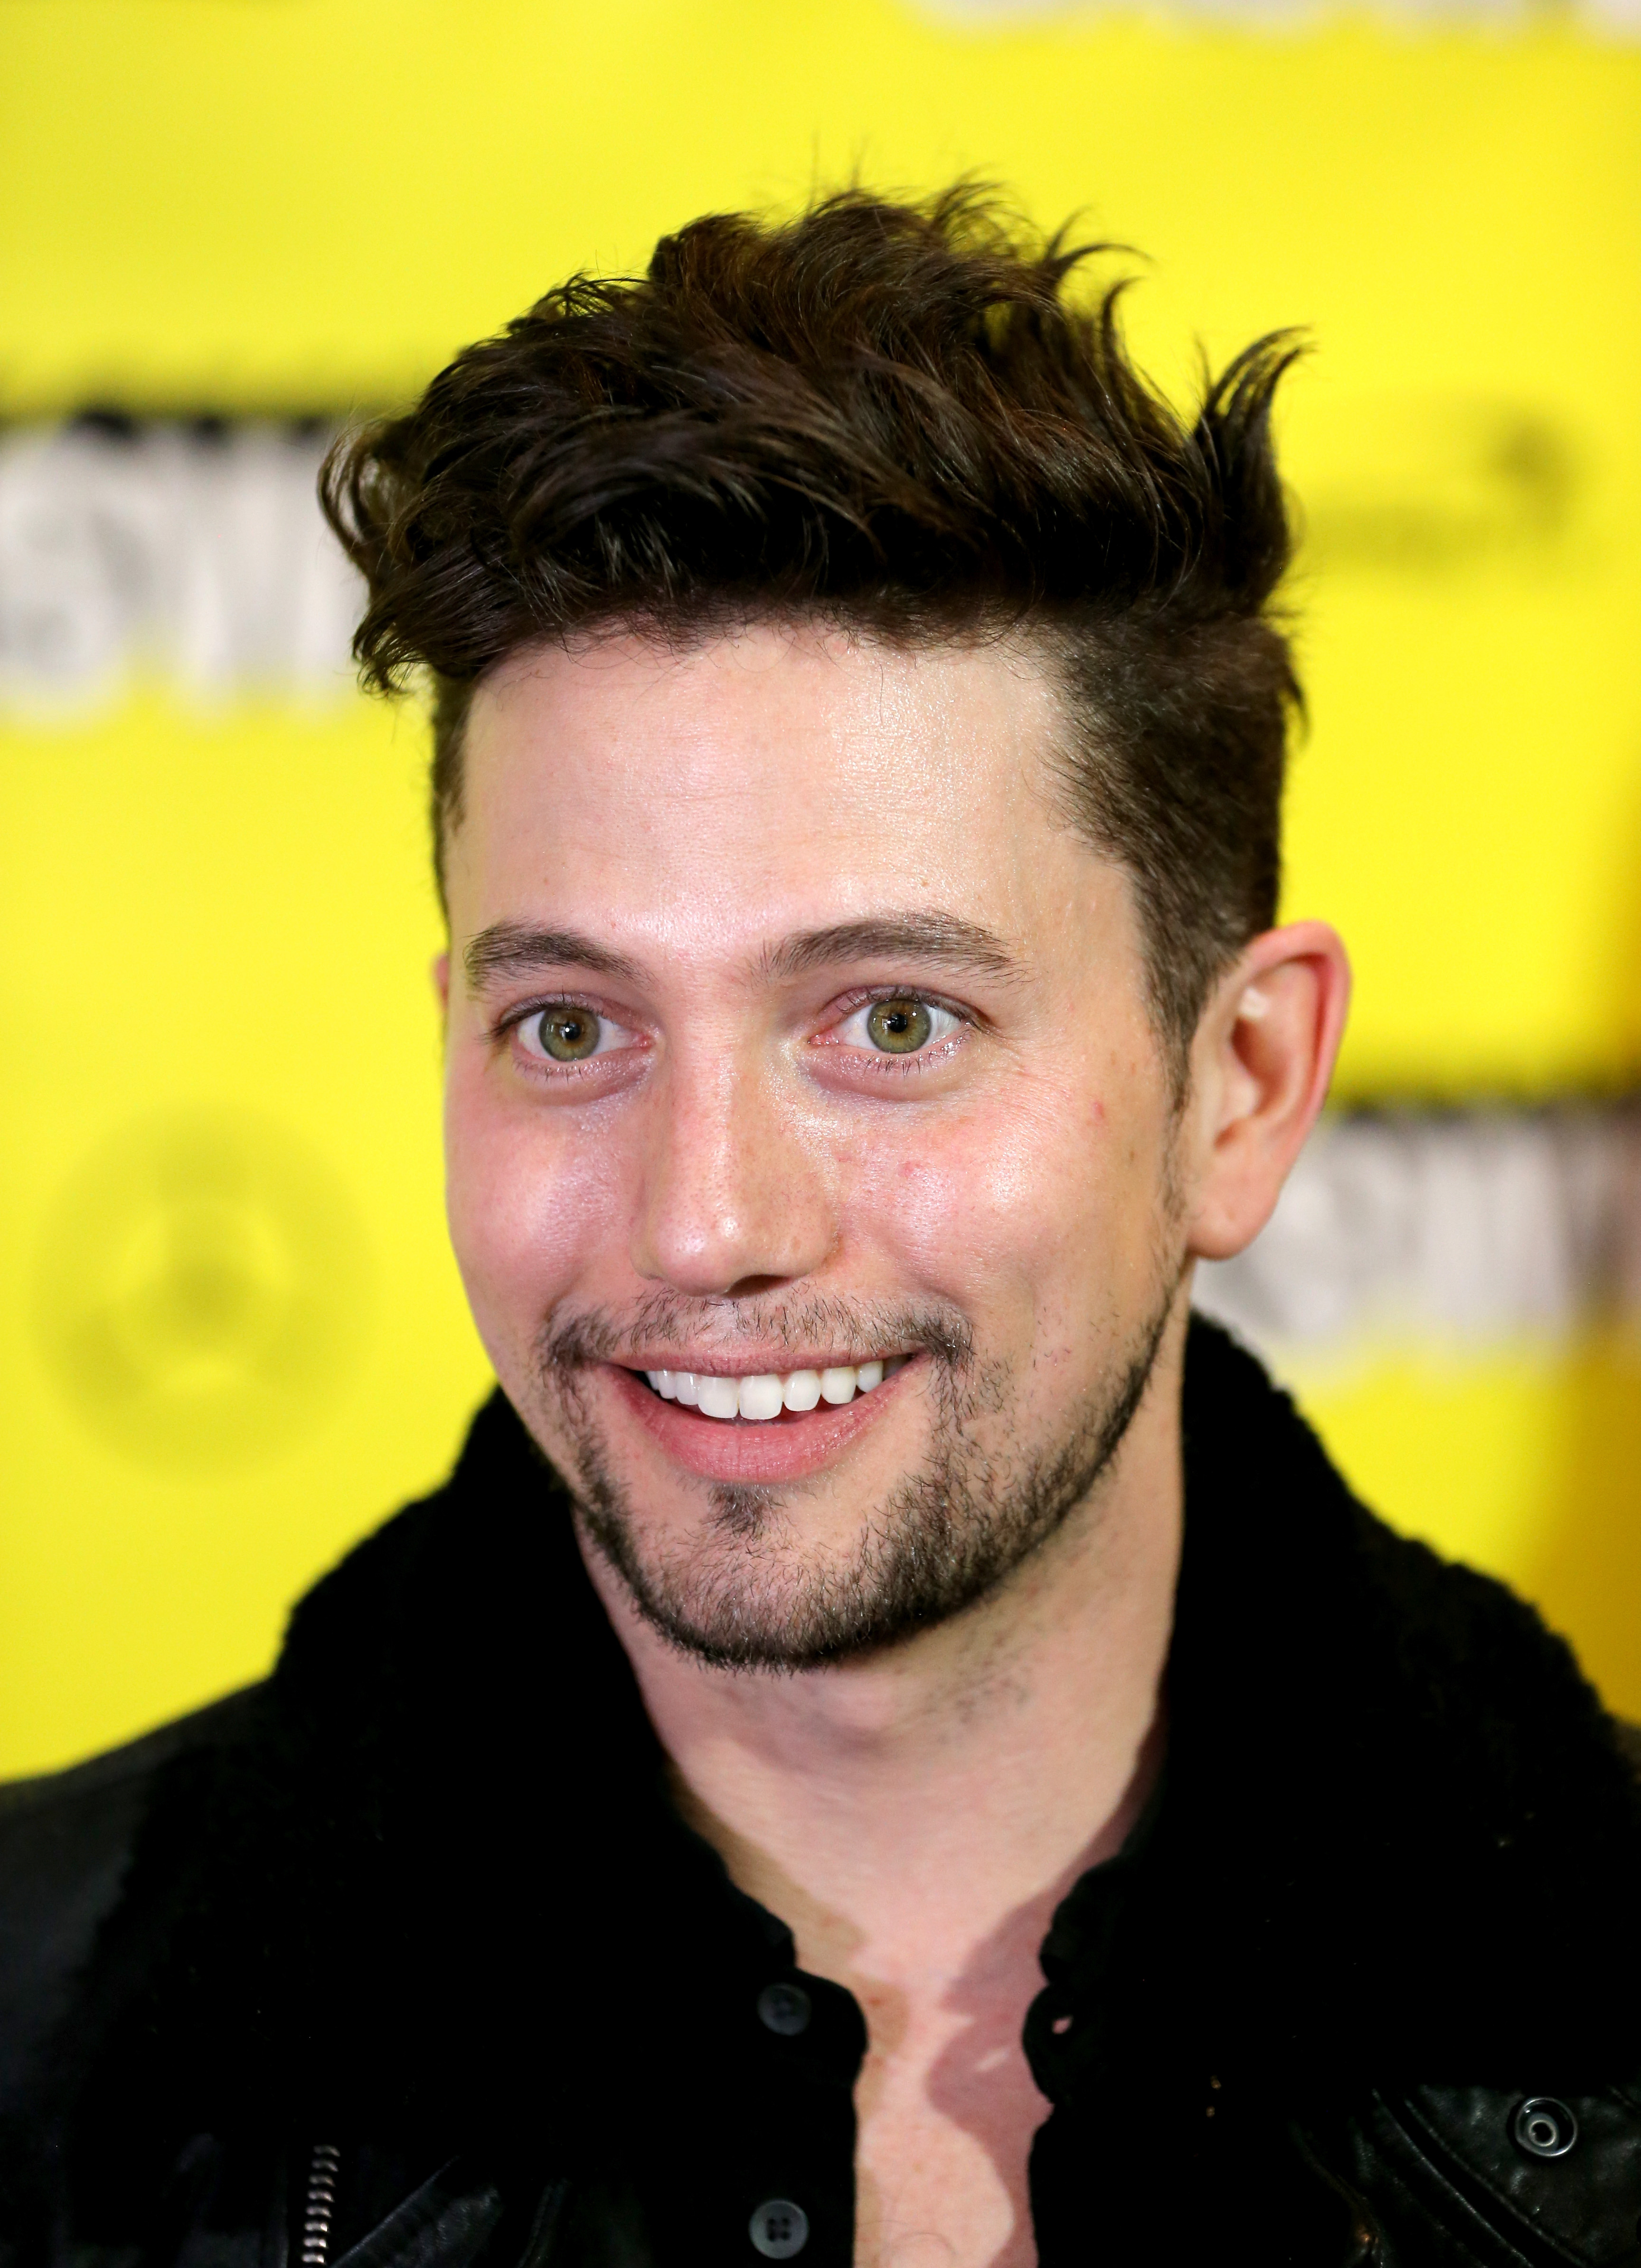 Jackson Rathbone attends the Wall of Mexico during the 2019 SXSW Convention and Festivals